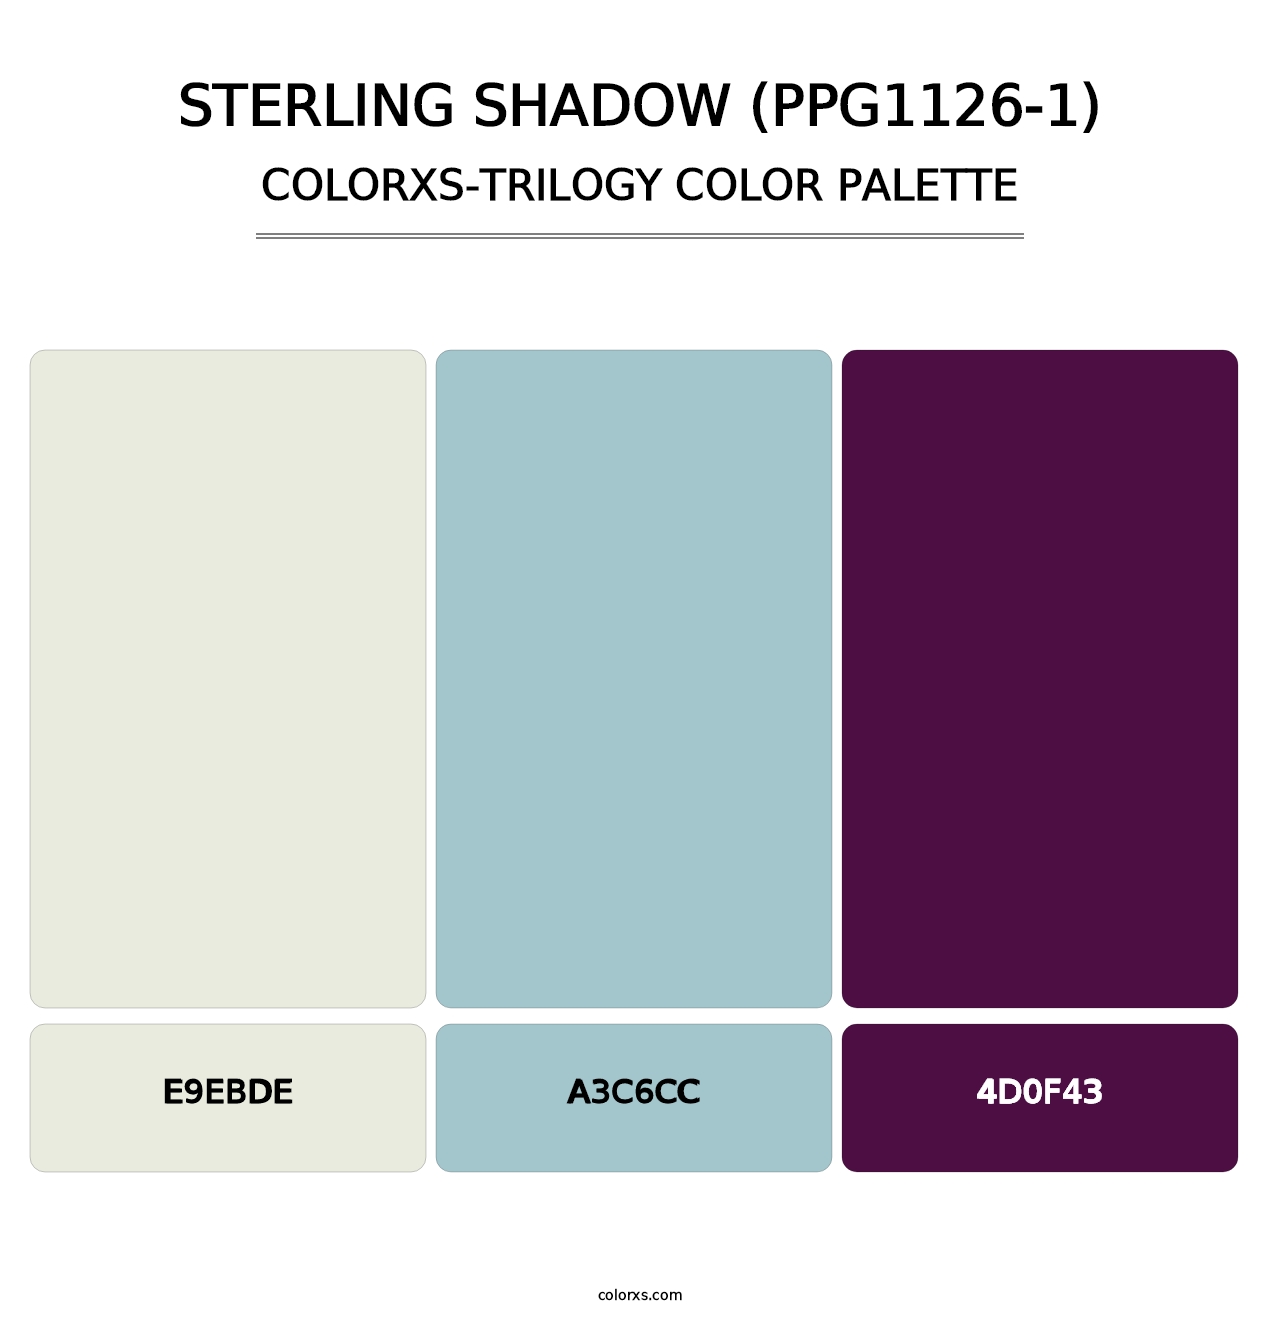 Sterling Shadow (PPG1126-1) - Colorxs Trilogy Palette